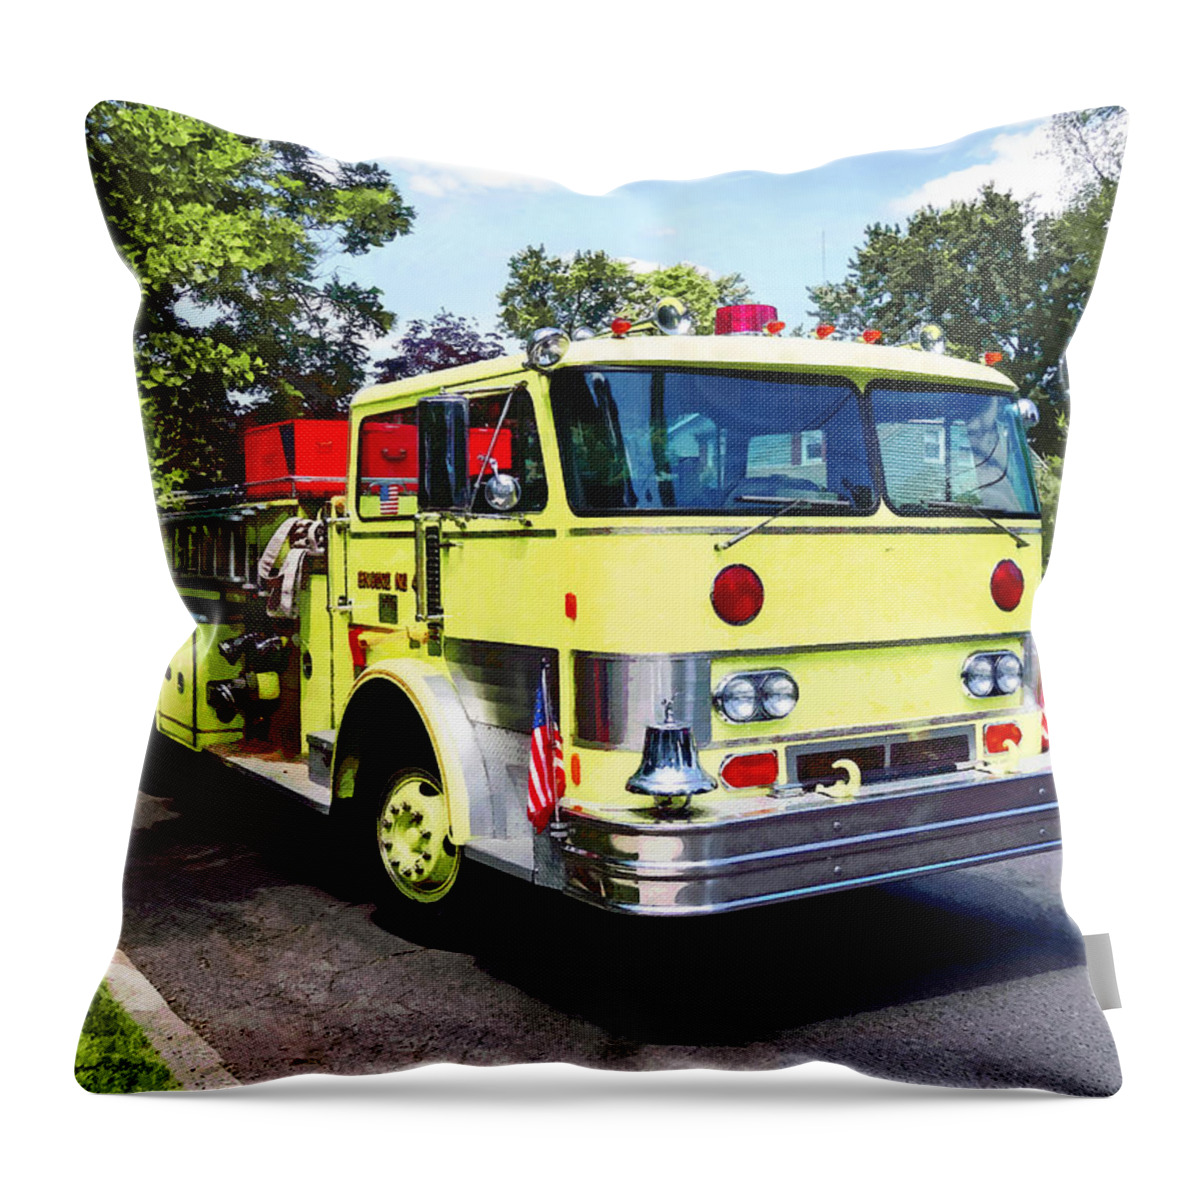 Fire Engine Throw Pillow featuring the photograph Yellow Fire Truck by Susan Savad